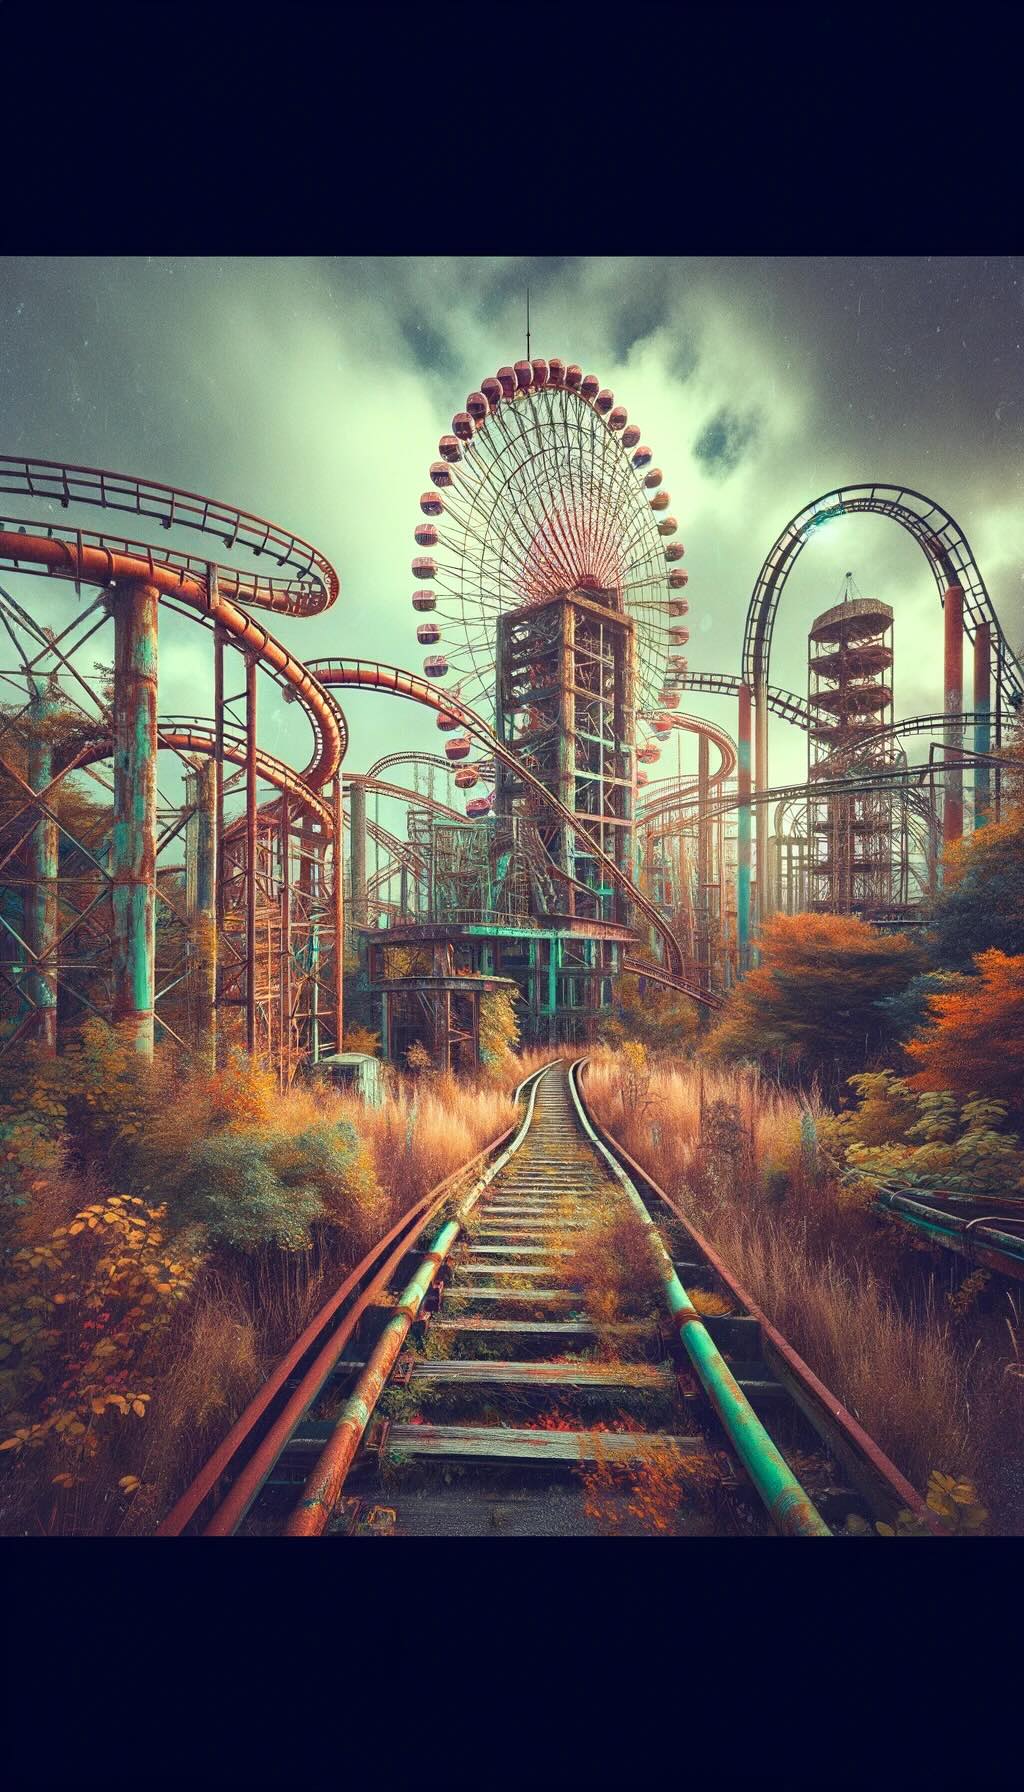 Allure of Japan's abandoned theme parks for urban explorers and photographers, rendered in a retro fade digital art style depicts the haunting beauty and historical curiosity of these spaces, with elements like rusting rides and overgrown paths. The composition conveys the thrill of discovery and the importance of ethical exploration, evoking a narrative of forgotten joy and respect for the past.